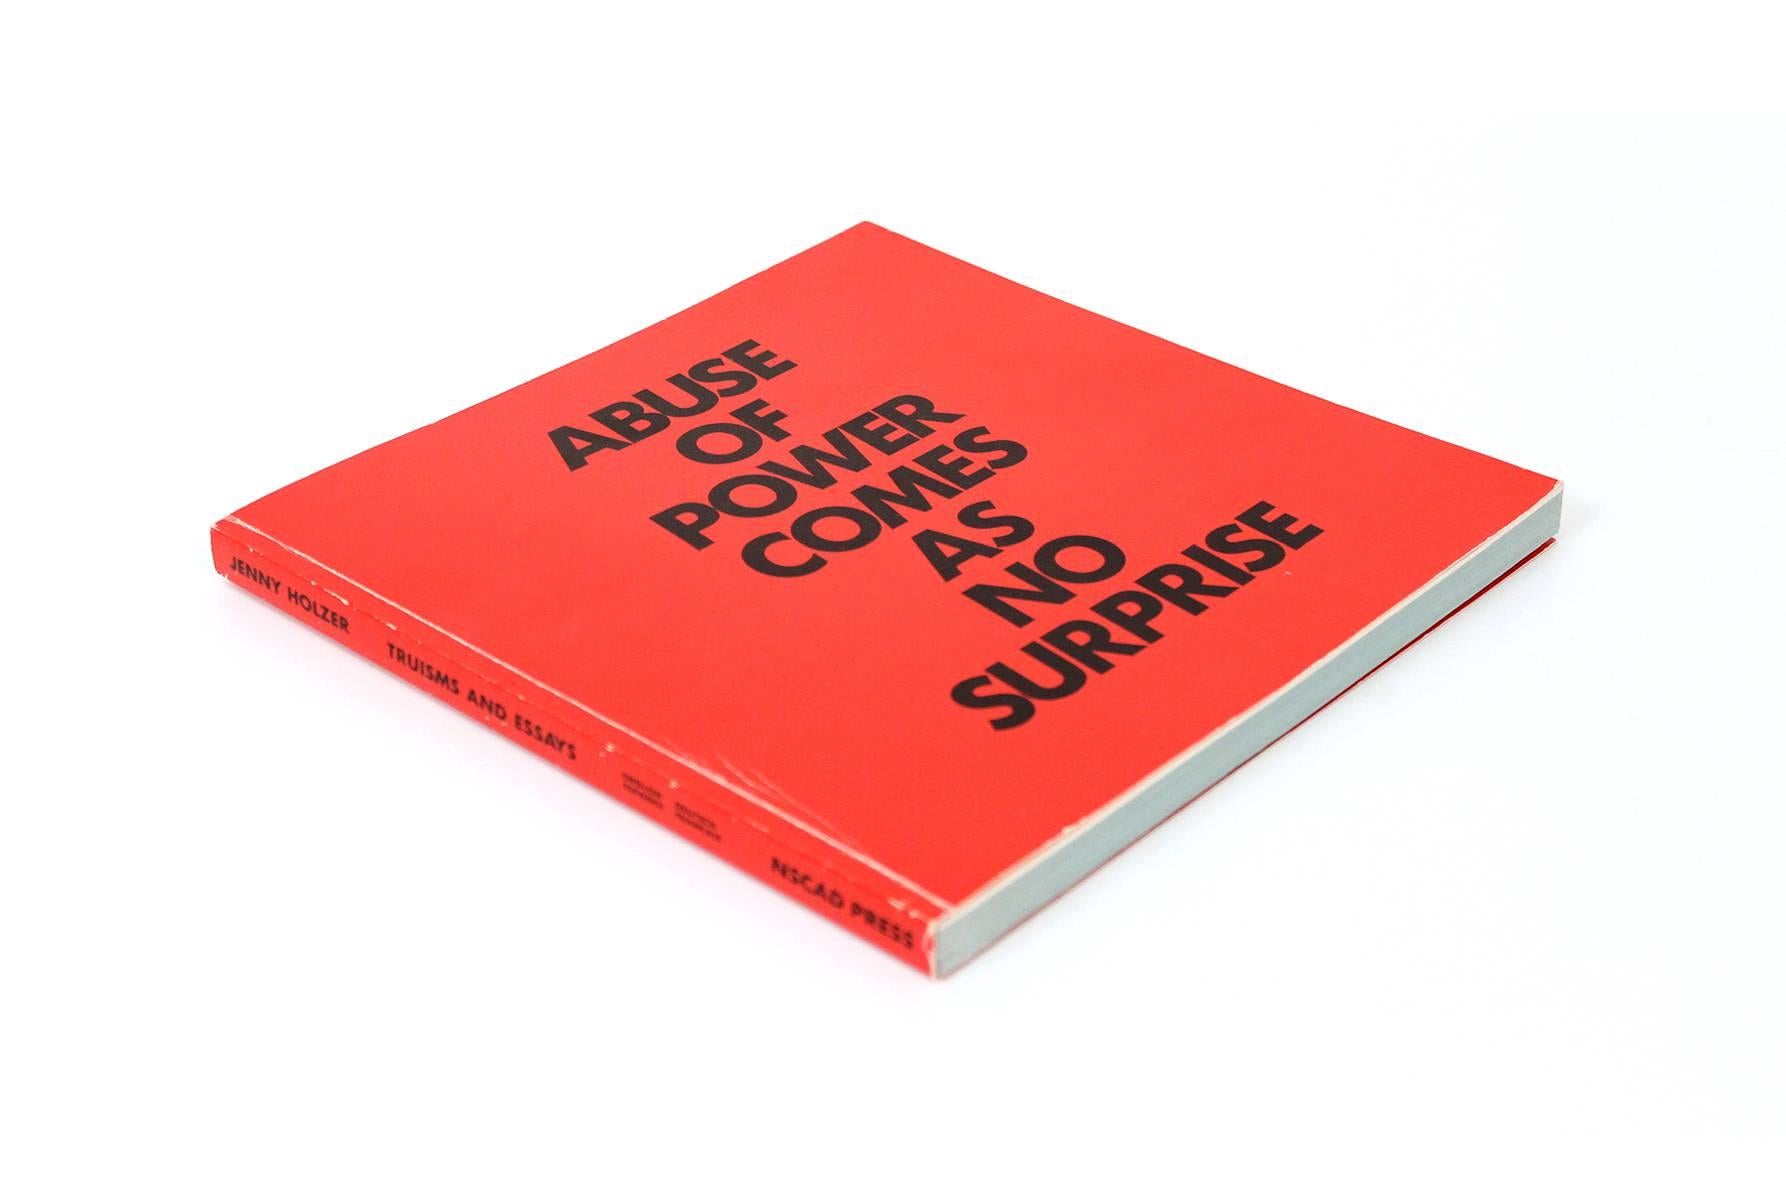 Early and important 1980s artists book by Jenny Holzer.  It's a complete text of Holzers 